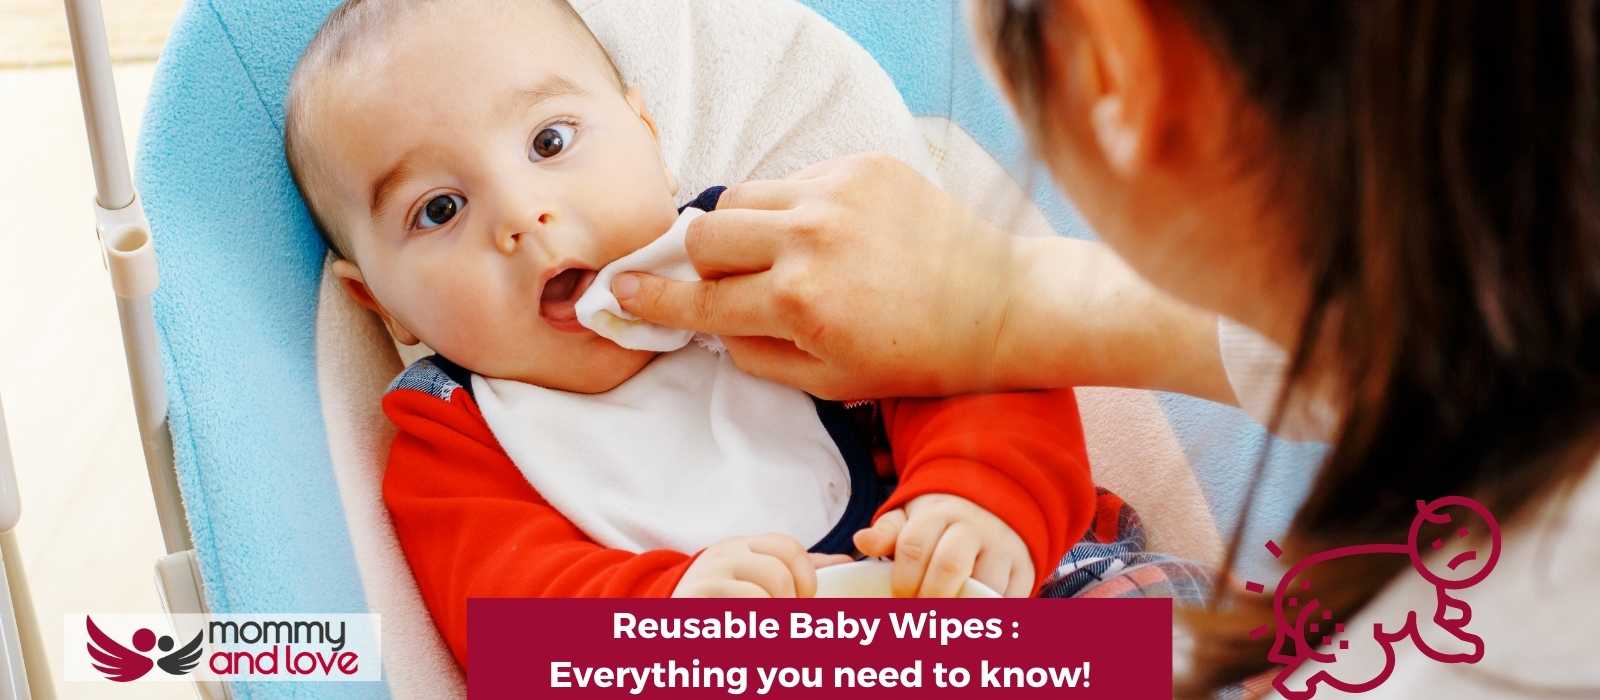 Reusable Baby Wipes Everything you need to know!